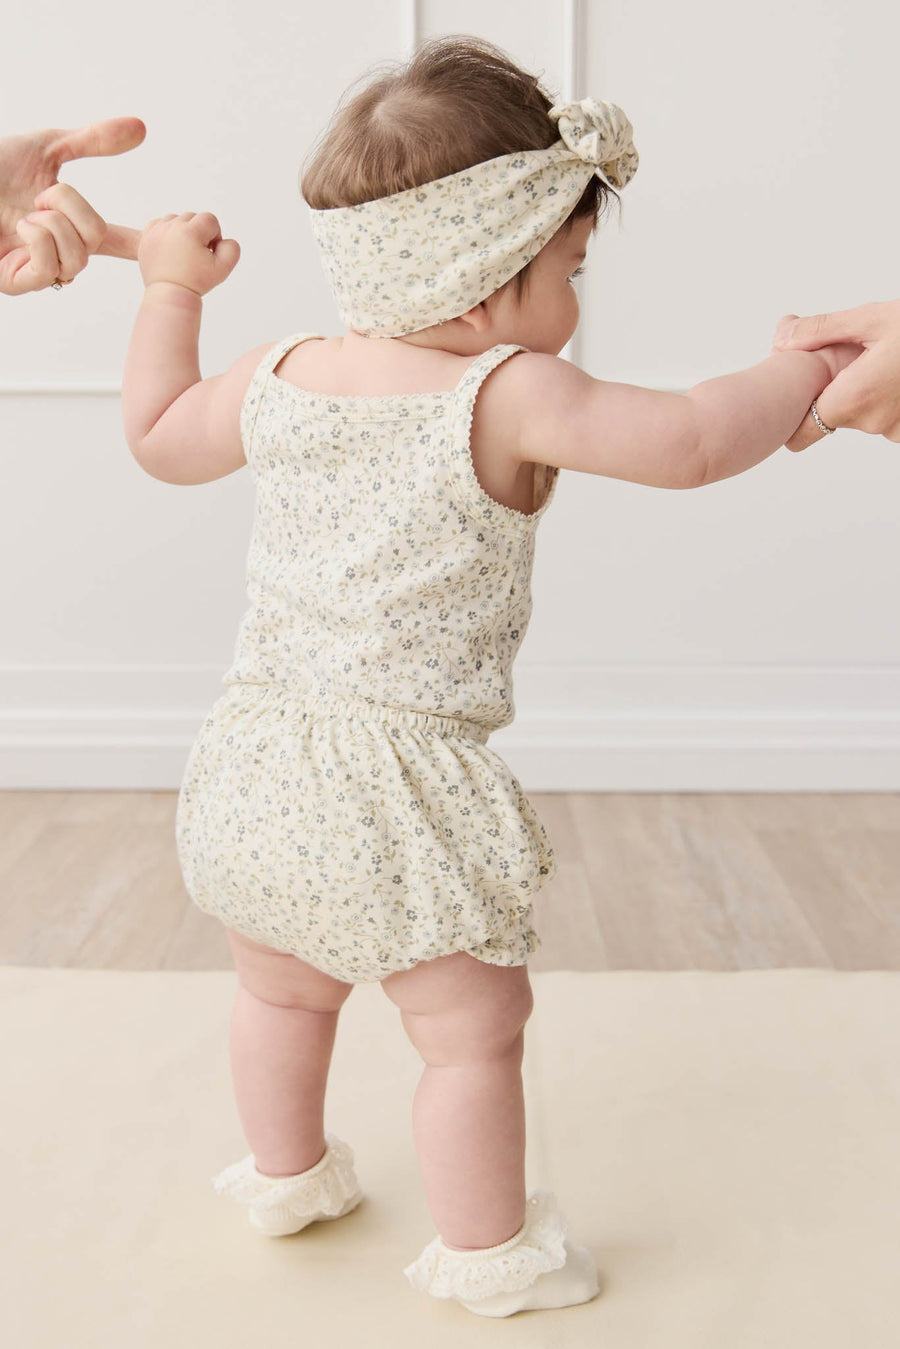 Organic Cotton Frill Bloomer - Dainty Egret Blues Childrens Bloomer from Jamie Kay USA